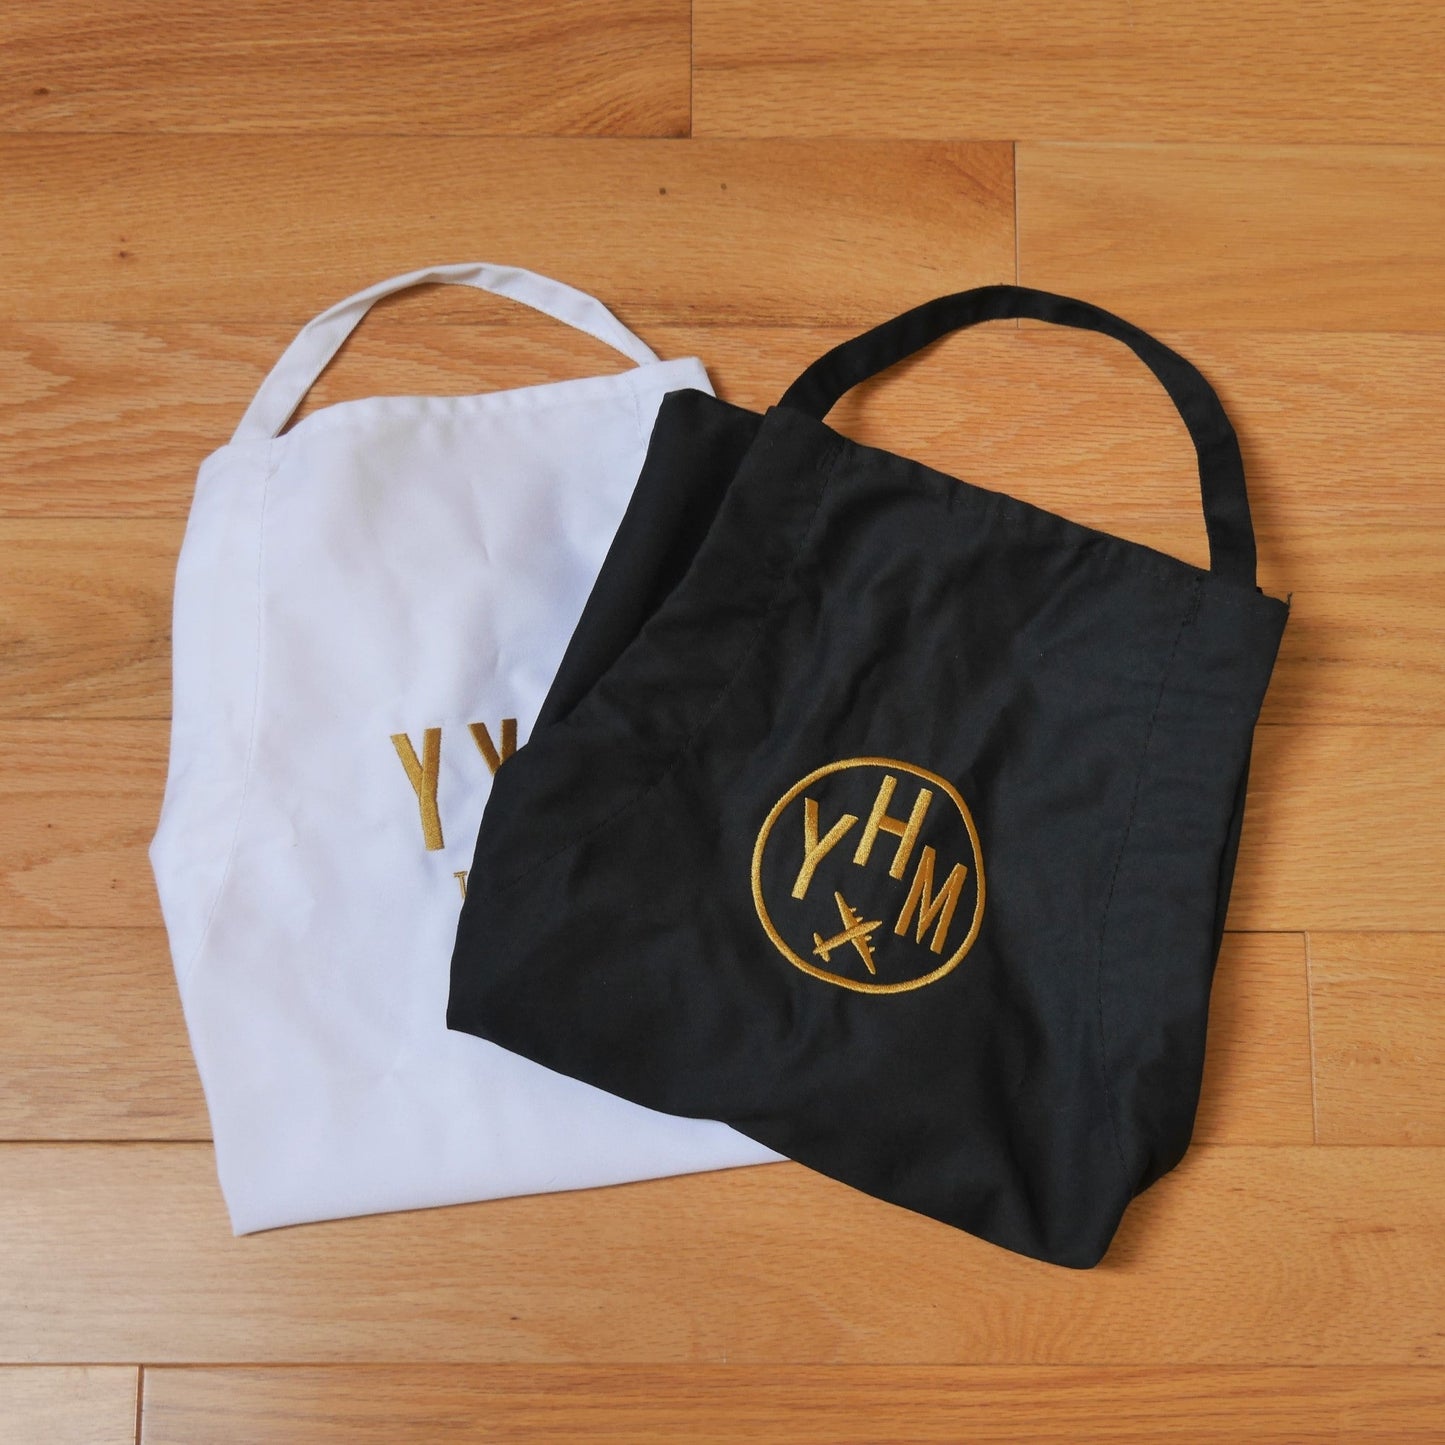 City Embroidered Apron - Old Gold • LHR London • YHM Designs - Image 14